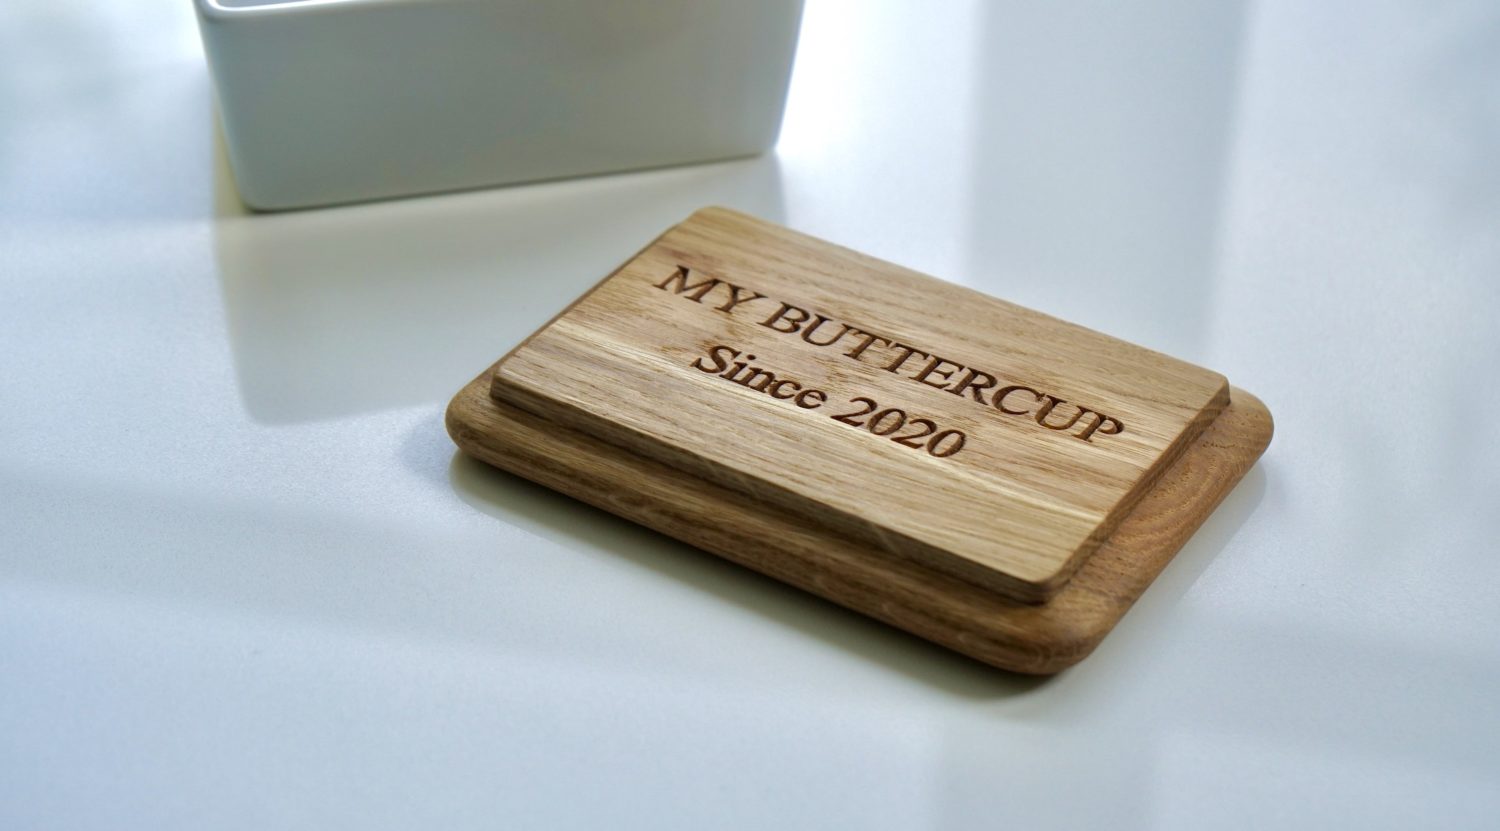 personalised-butter-dish